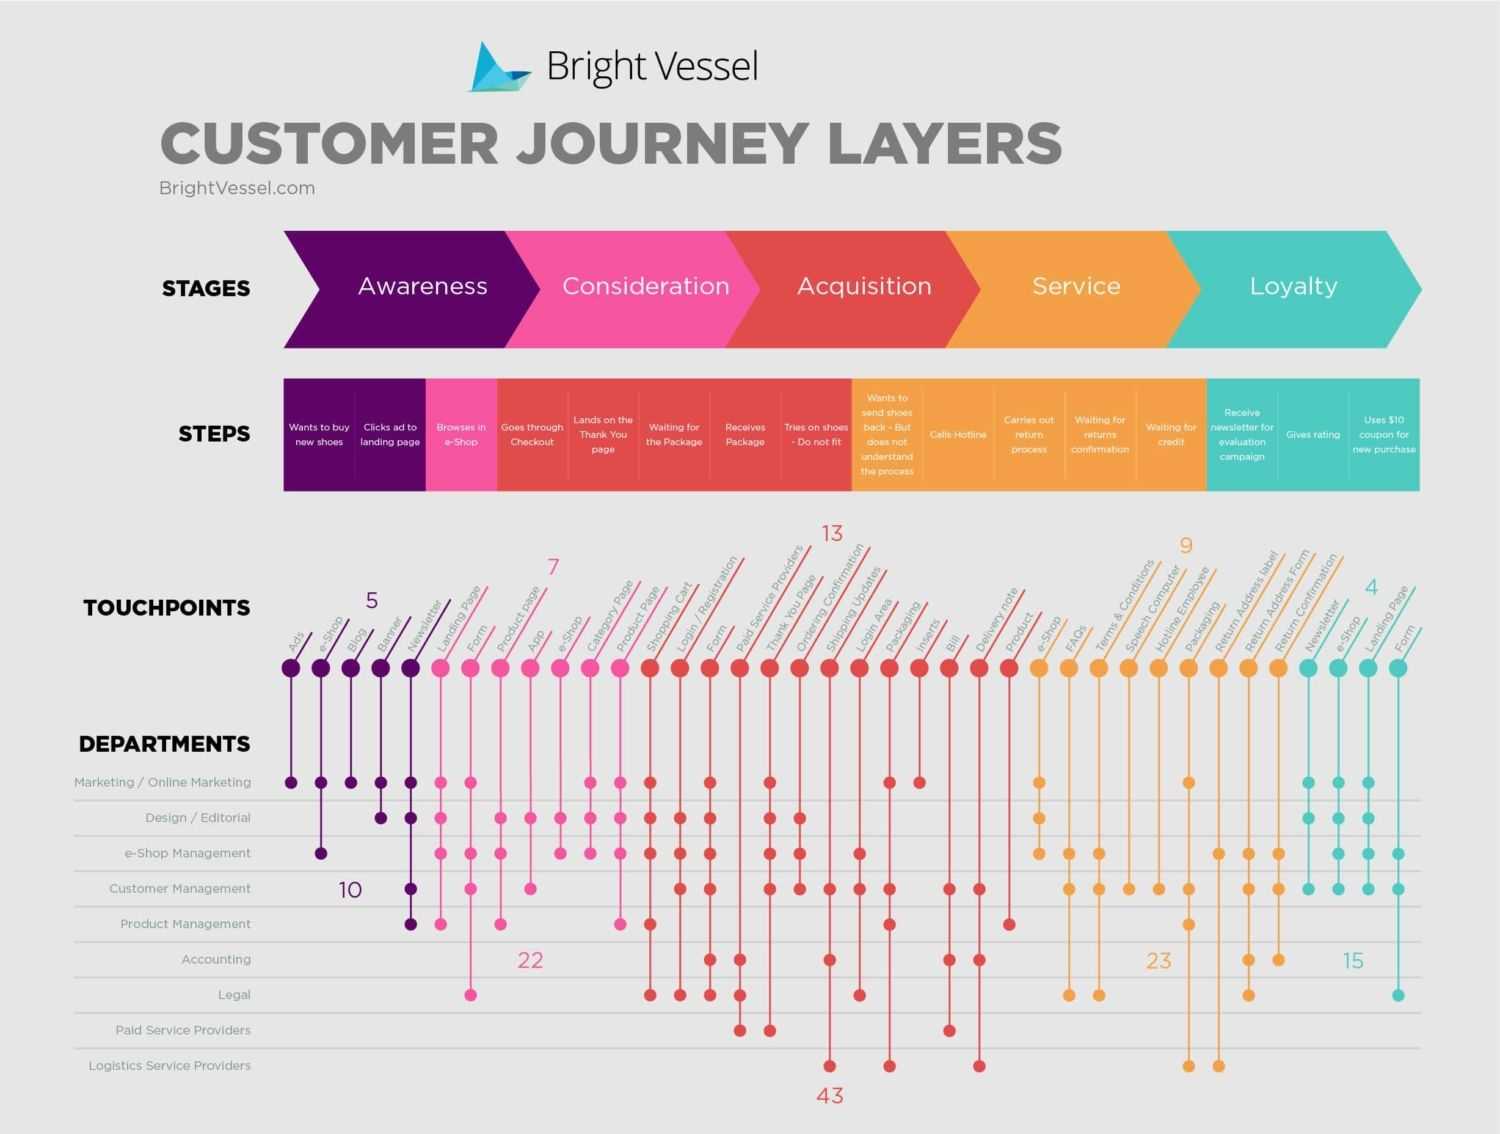 Customer journey mapping with data analytics and customer insights - BrightVessel